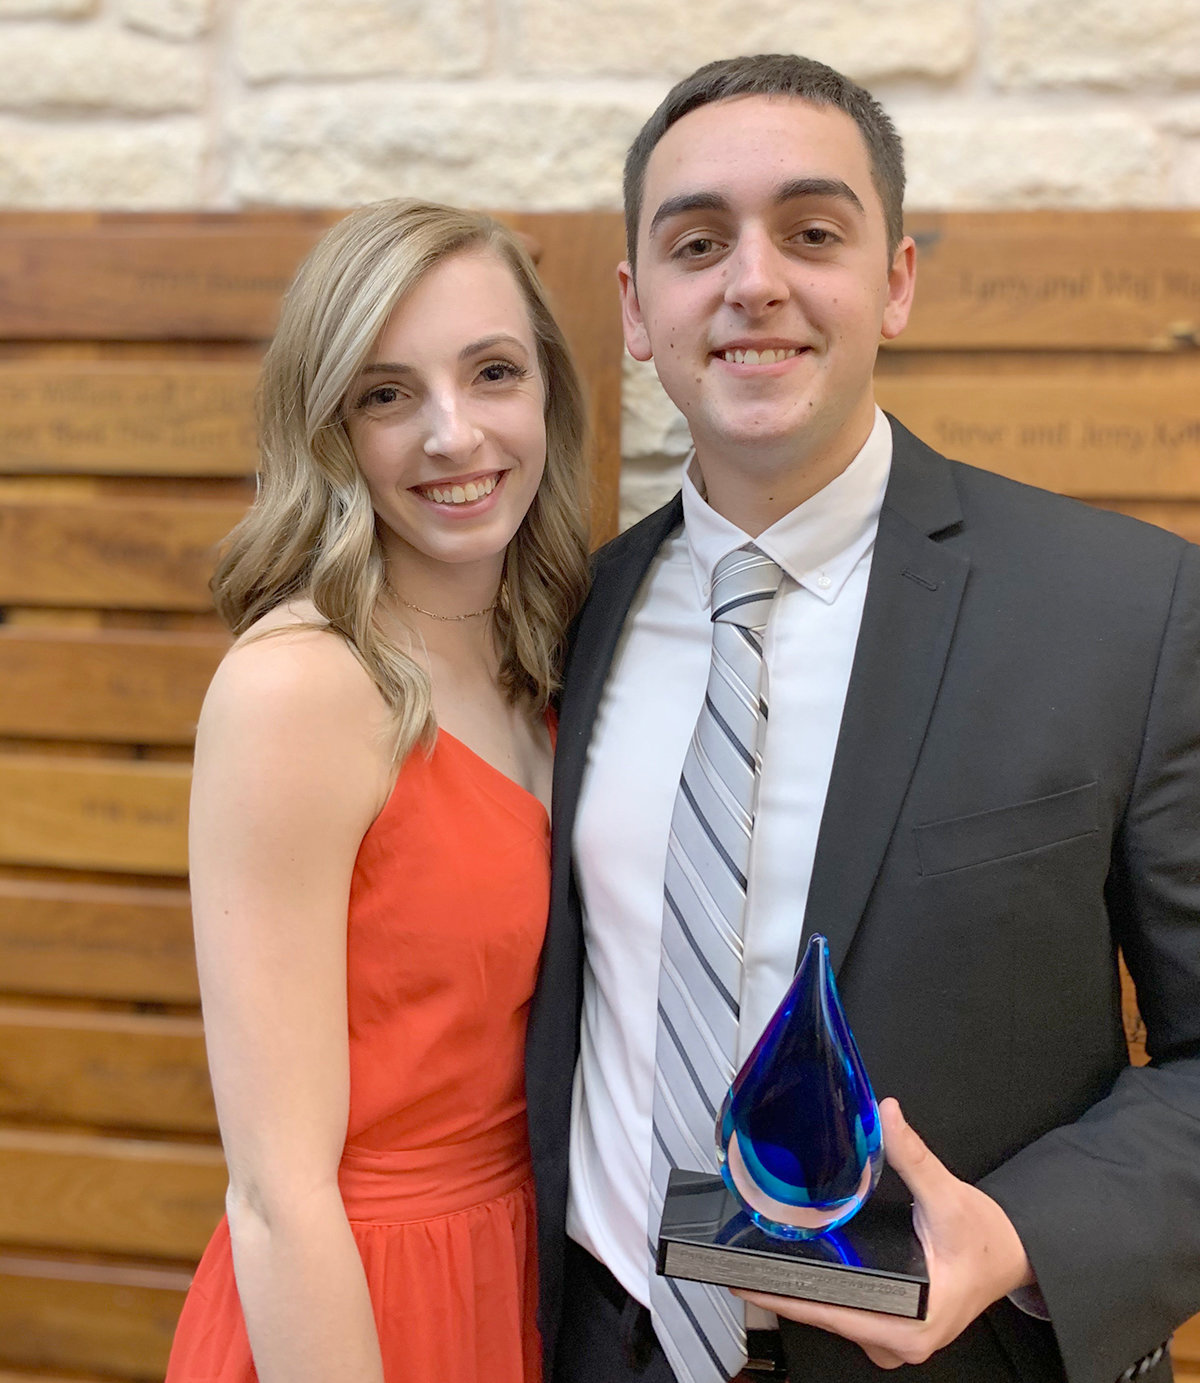 Grant Mills and girlfriend Jacey Lewandowski are shown at the Horizon Awards in February when Mills was recognized as one of Parker County’s 20 under 20.